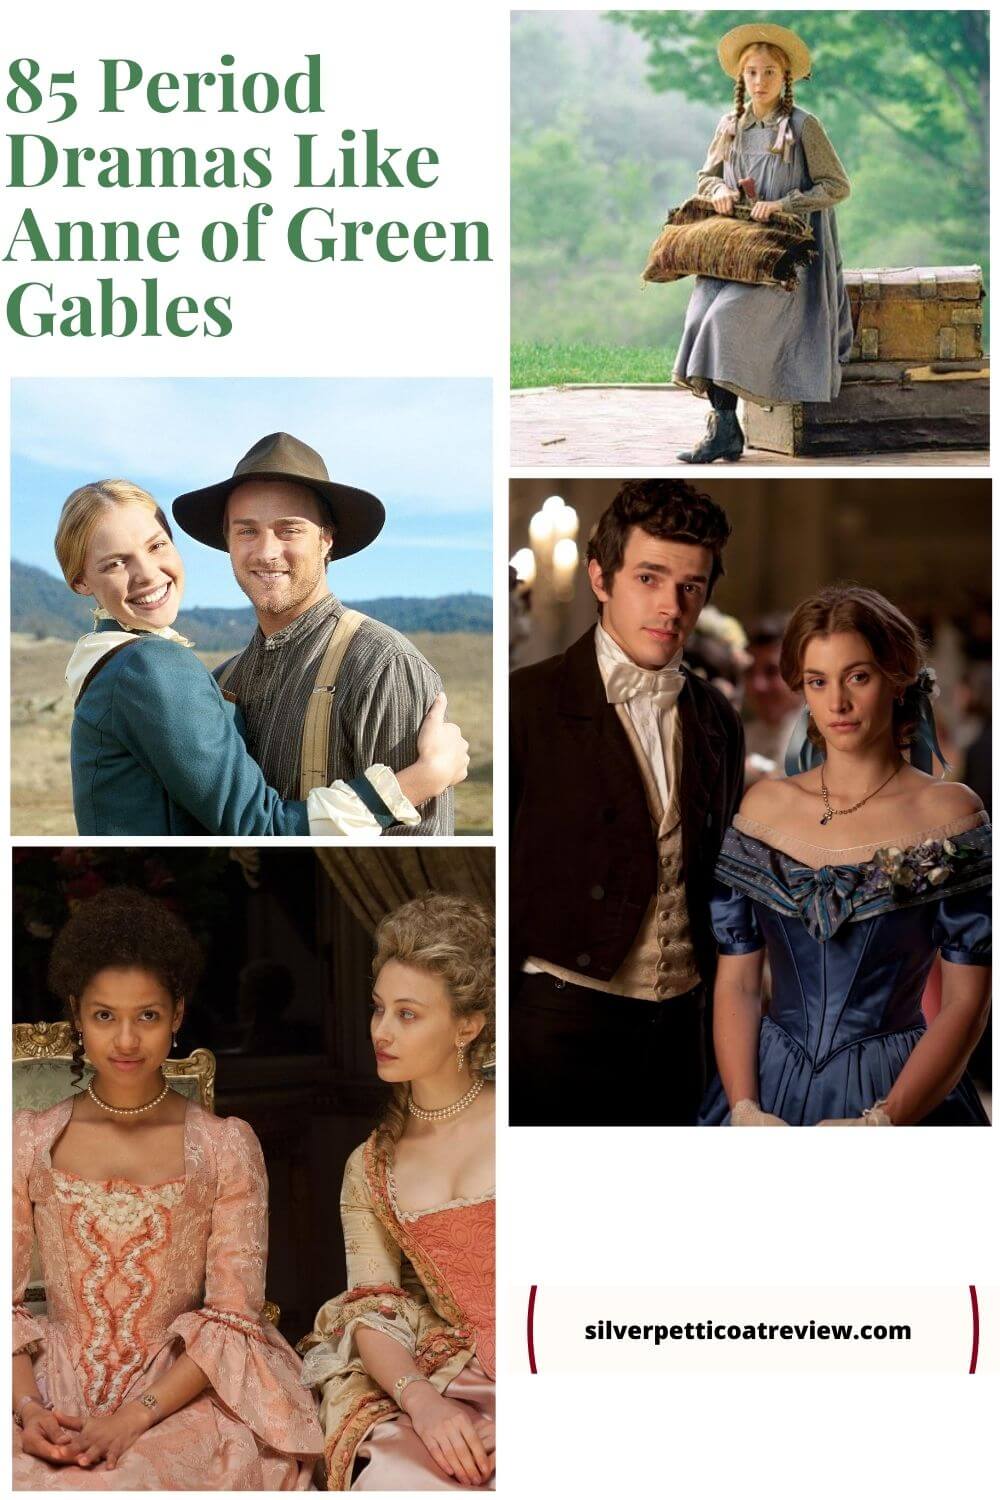 Anne of green gables 1987 download torrent